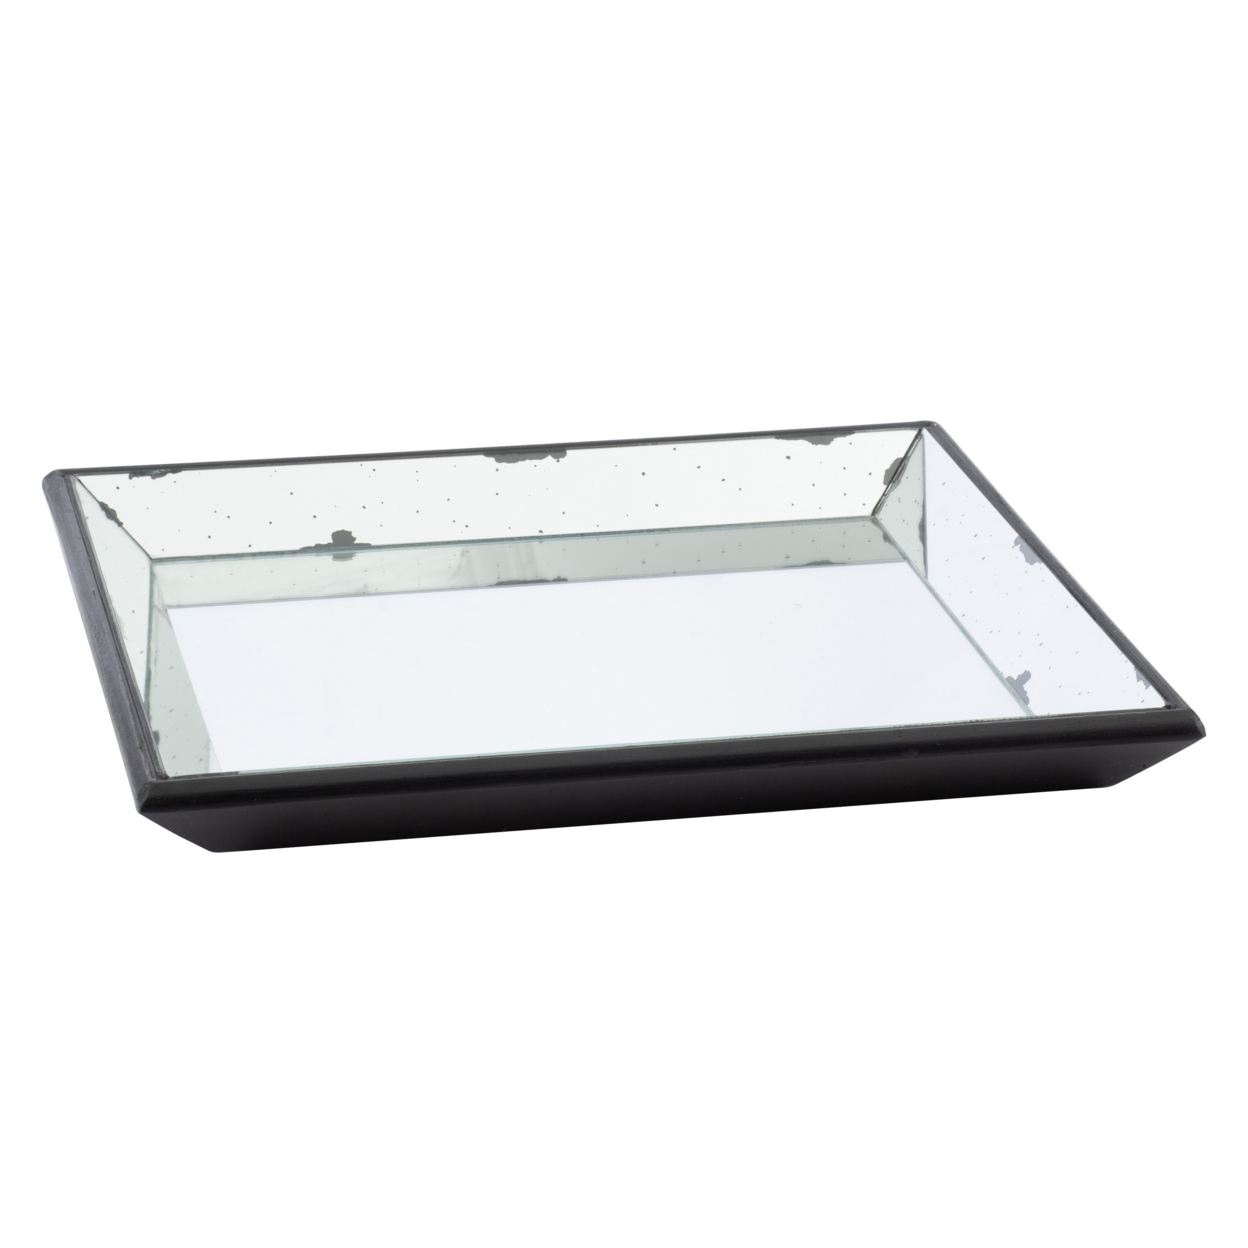 24 Inch Square Decorative Tray With Mirrored Surface, Modern Style, Black- Saltoro Sherpi